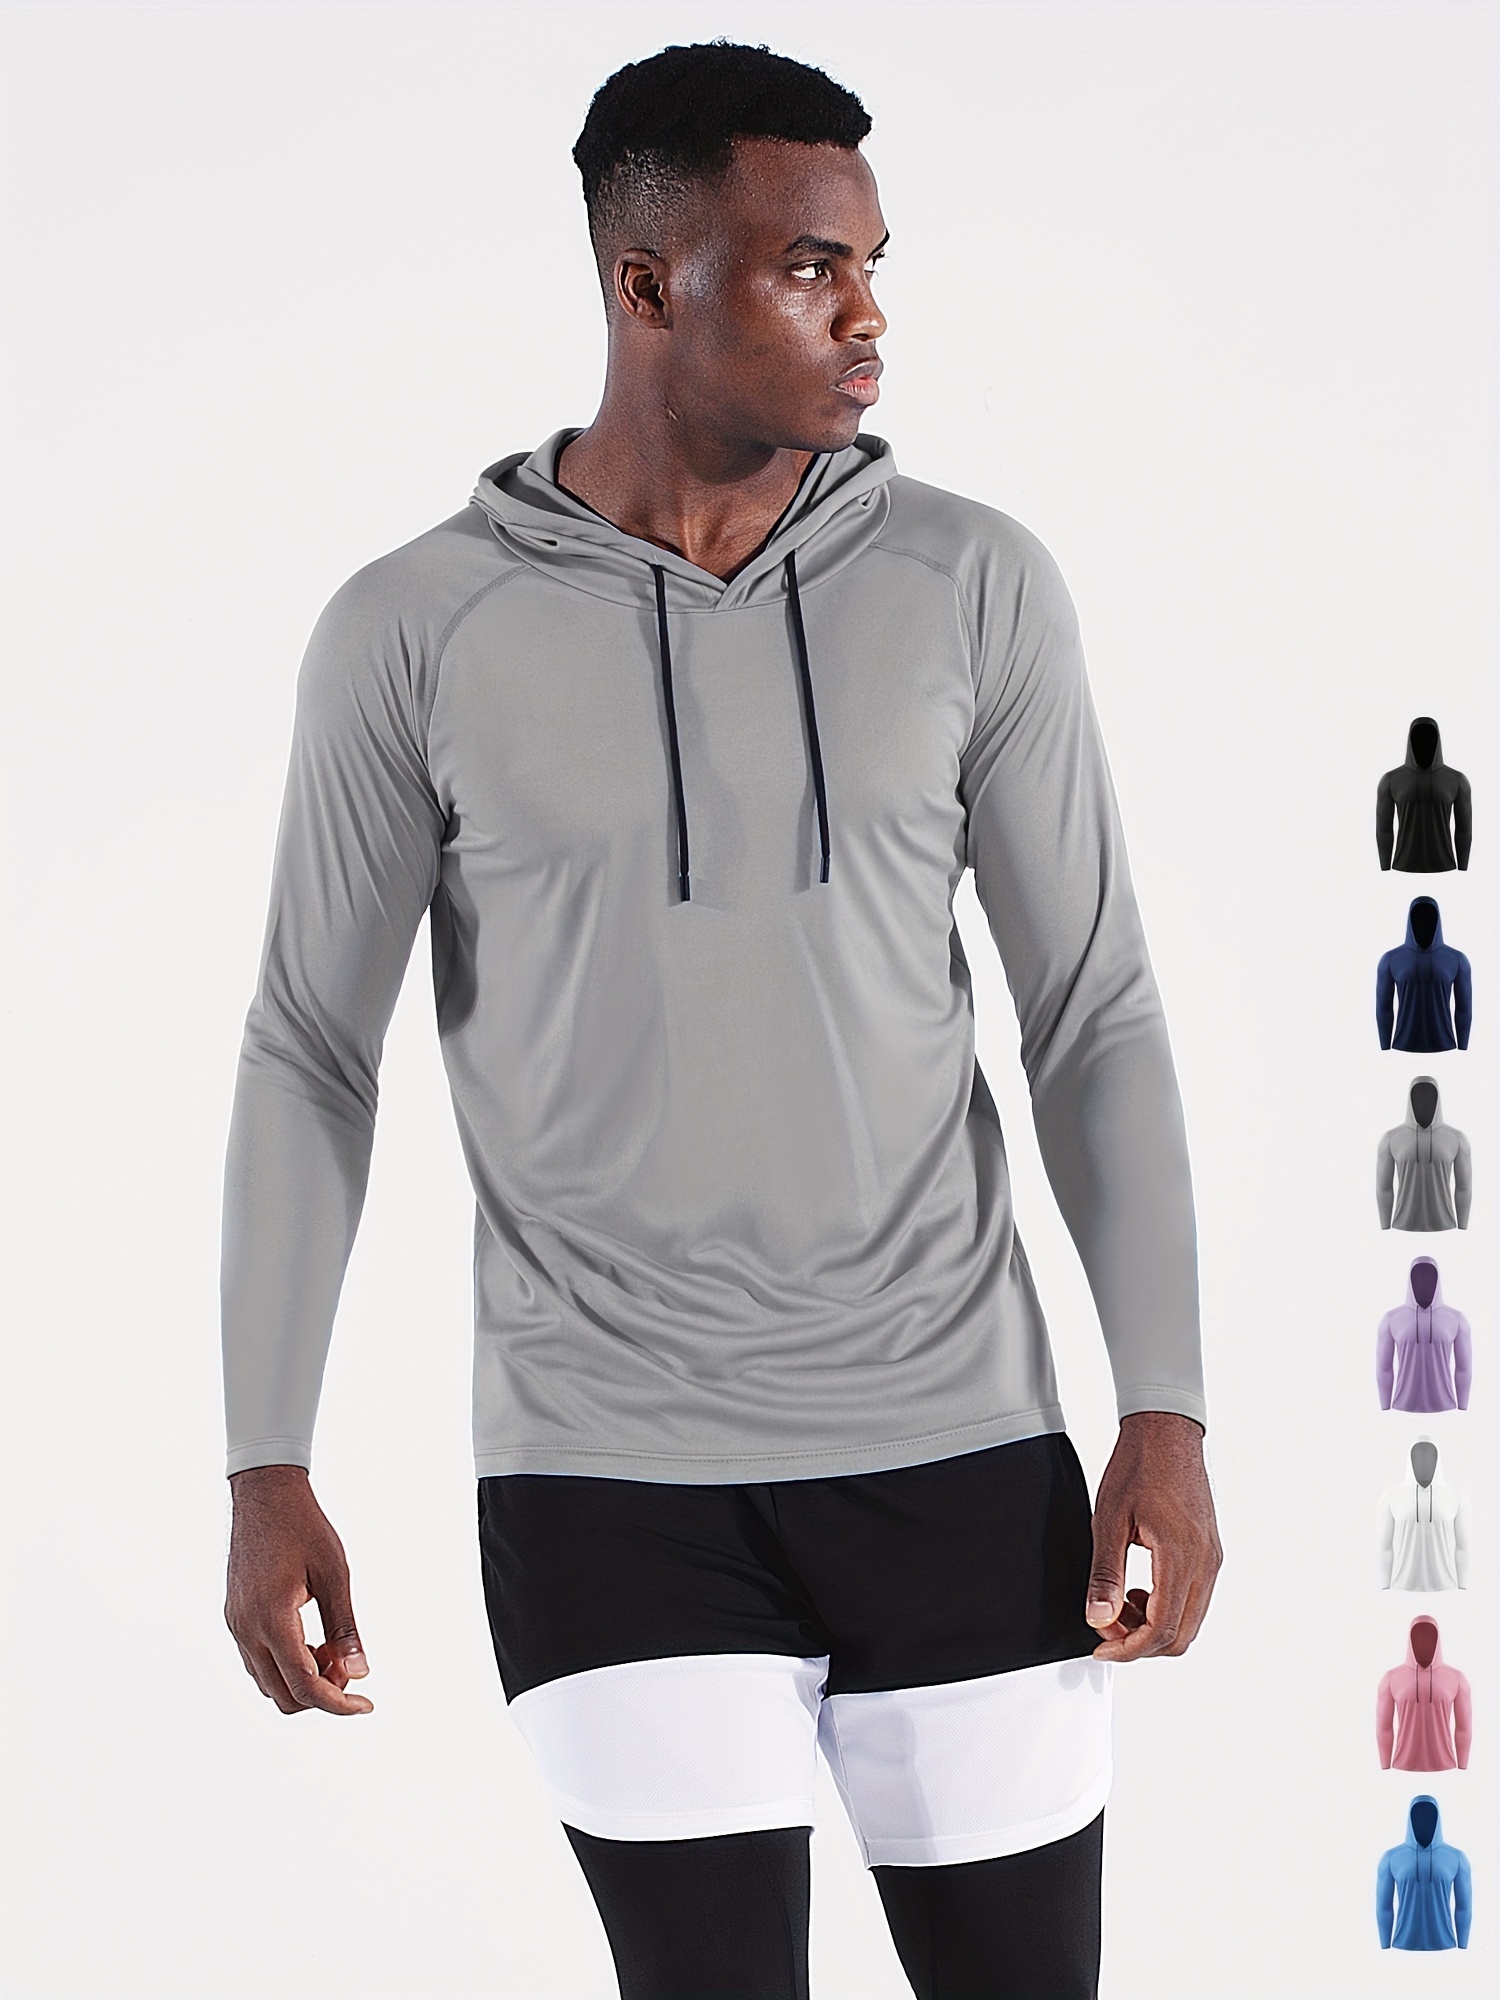 Sun Protection T-Shirts Mens Long Sleeve Hoodie Casual UV-Proof